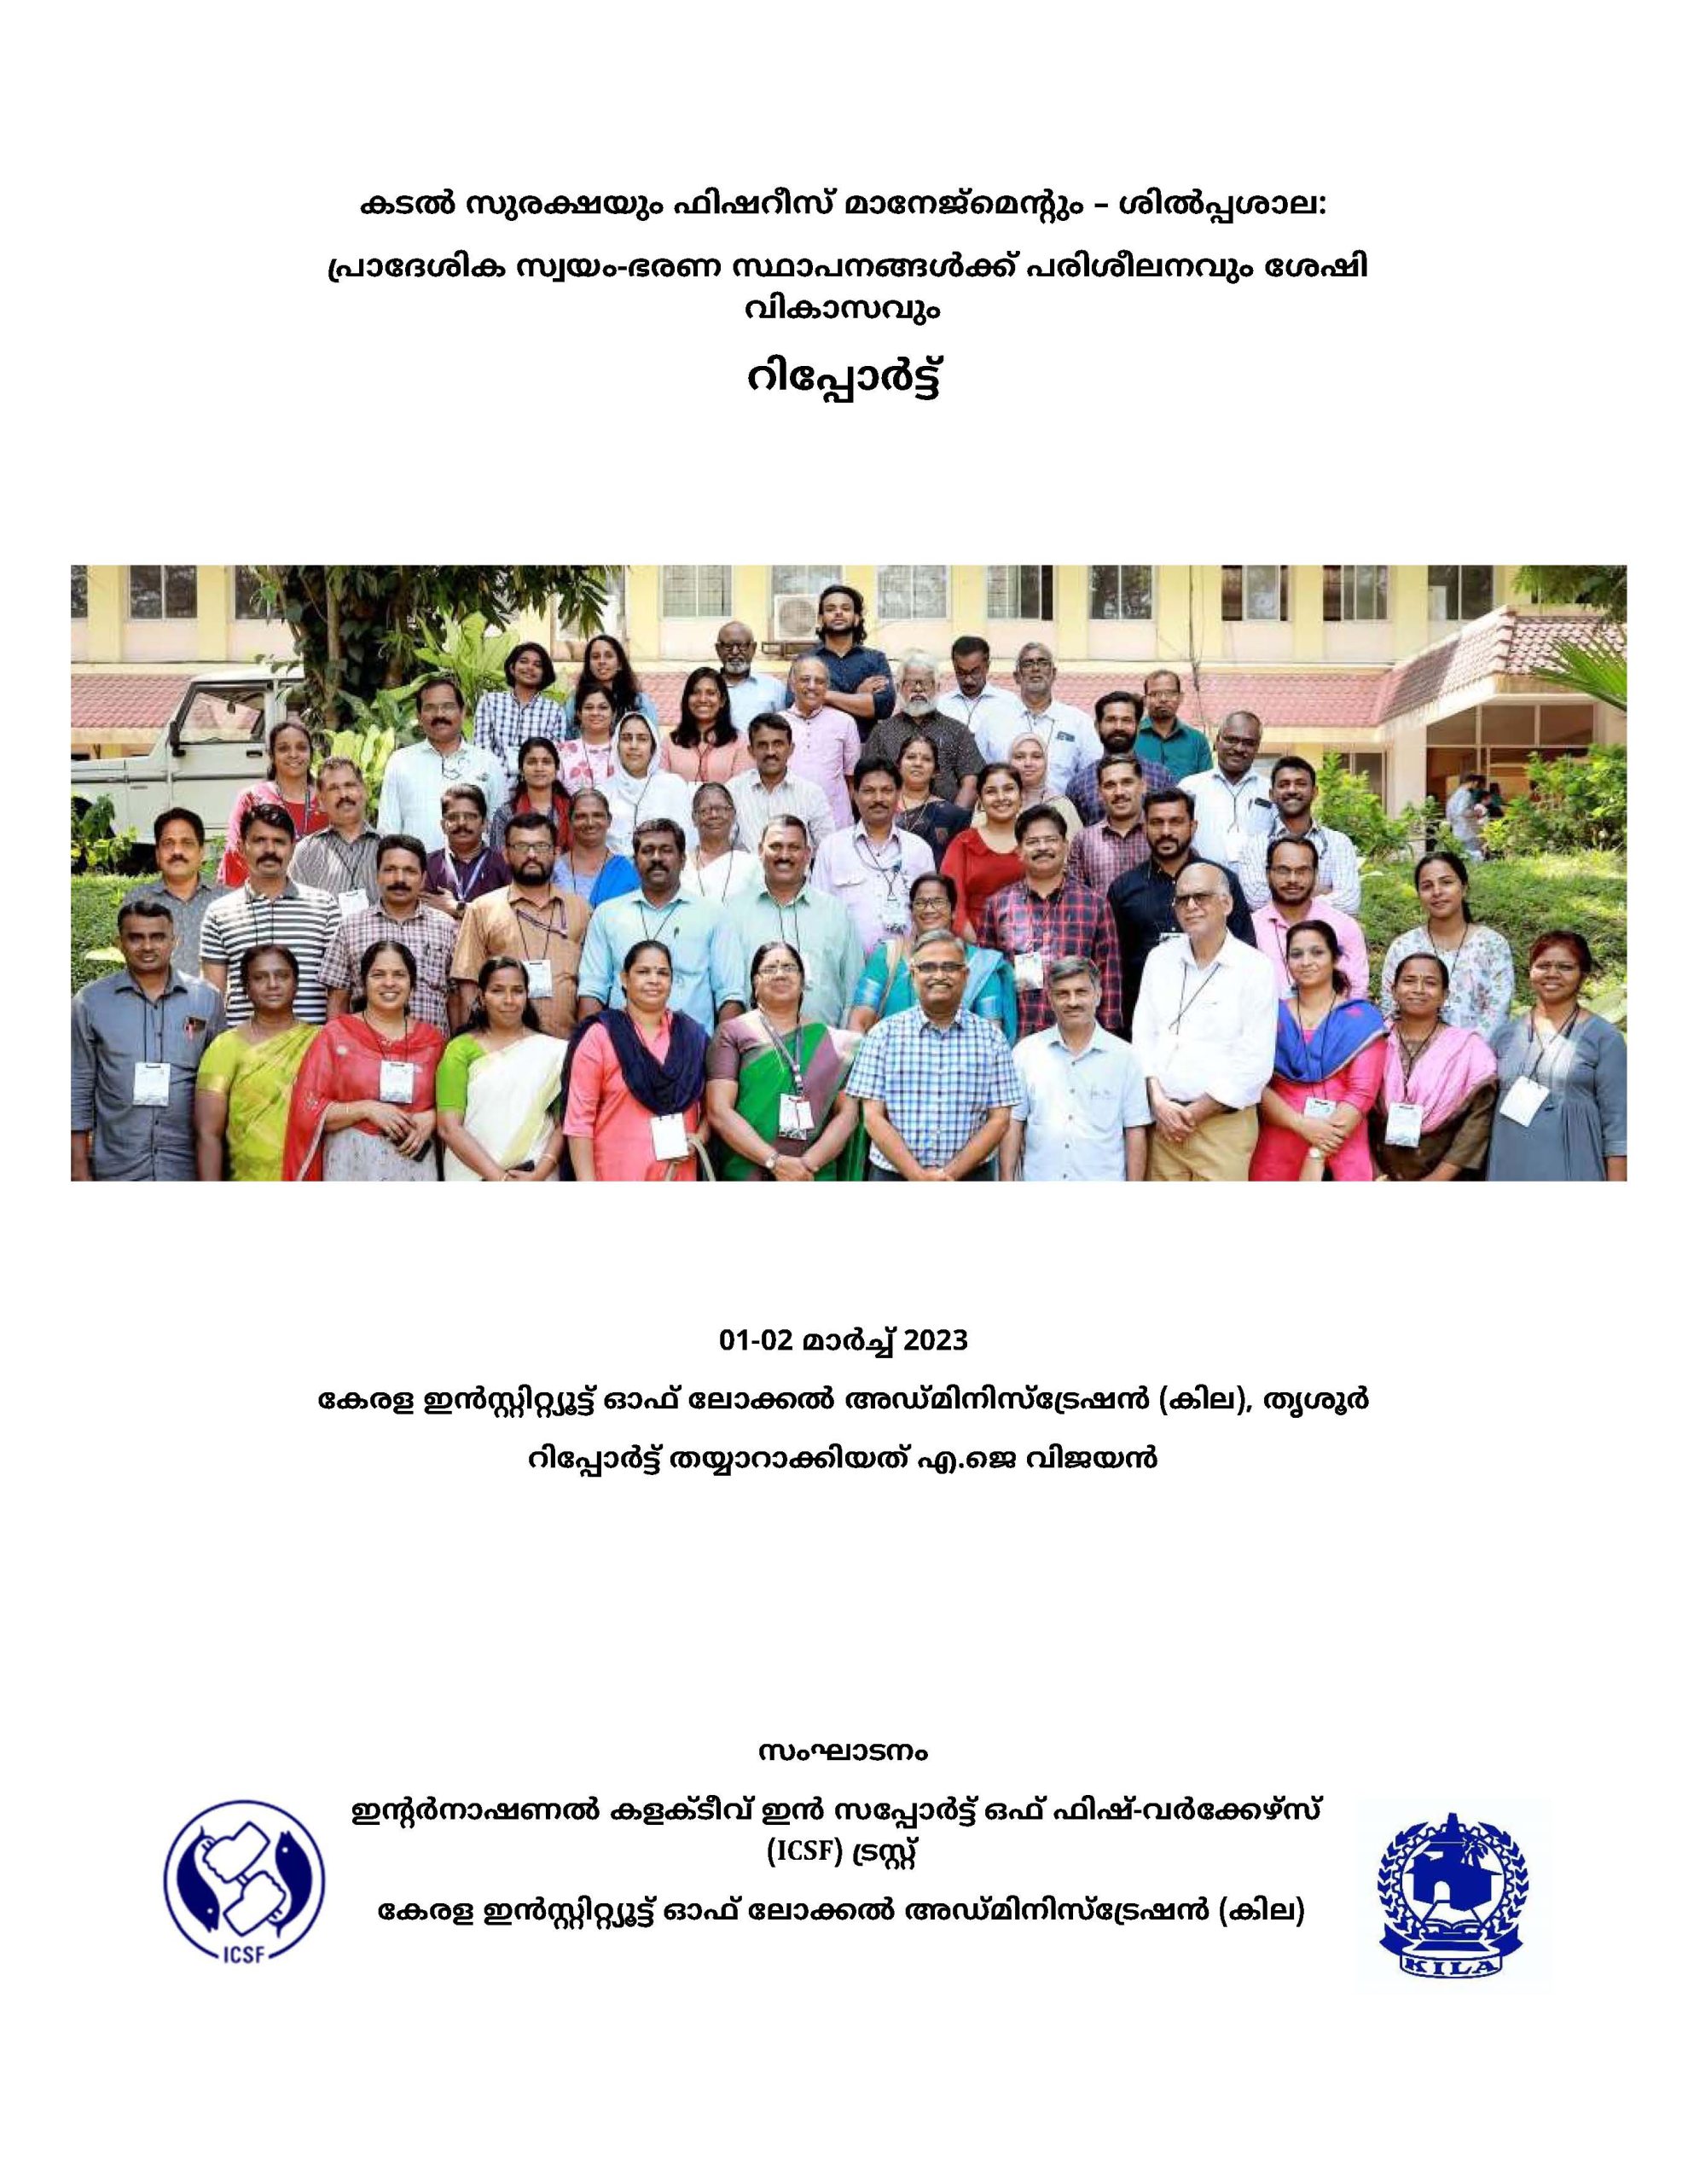 Report of the Workshop on Sea Safety and Fisheries Management: Training and Capacity Development of Local Self-Governments, 01-02 March 2023, Kerala, India (in Malayalam) Report prepared by A. J. Vijayan